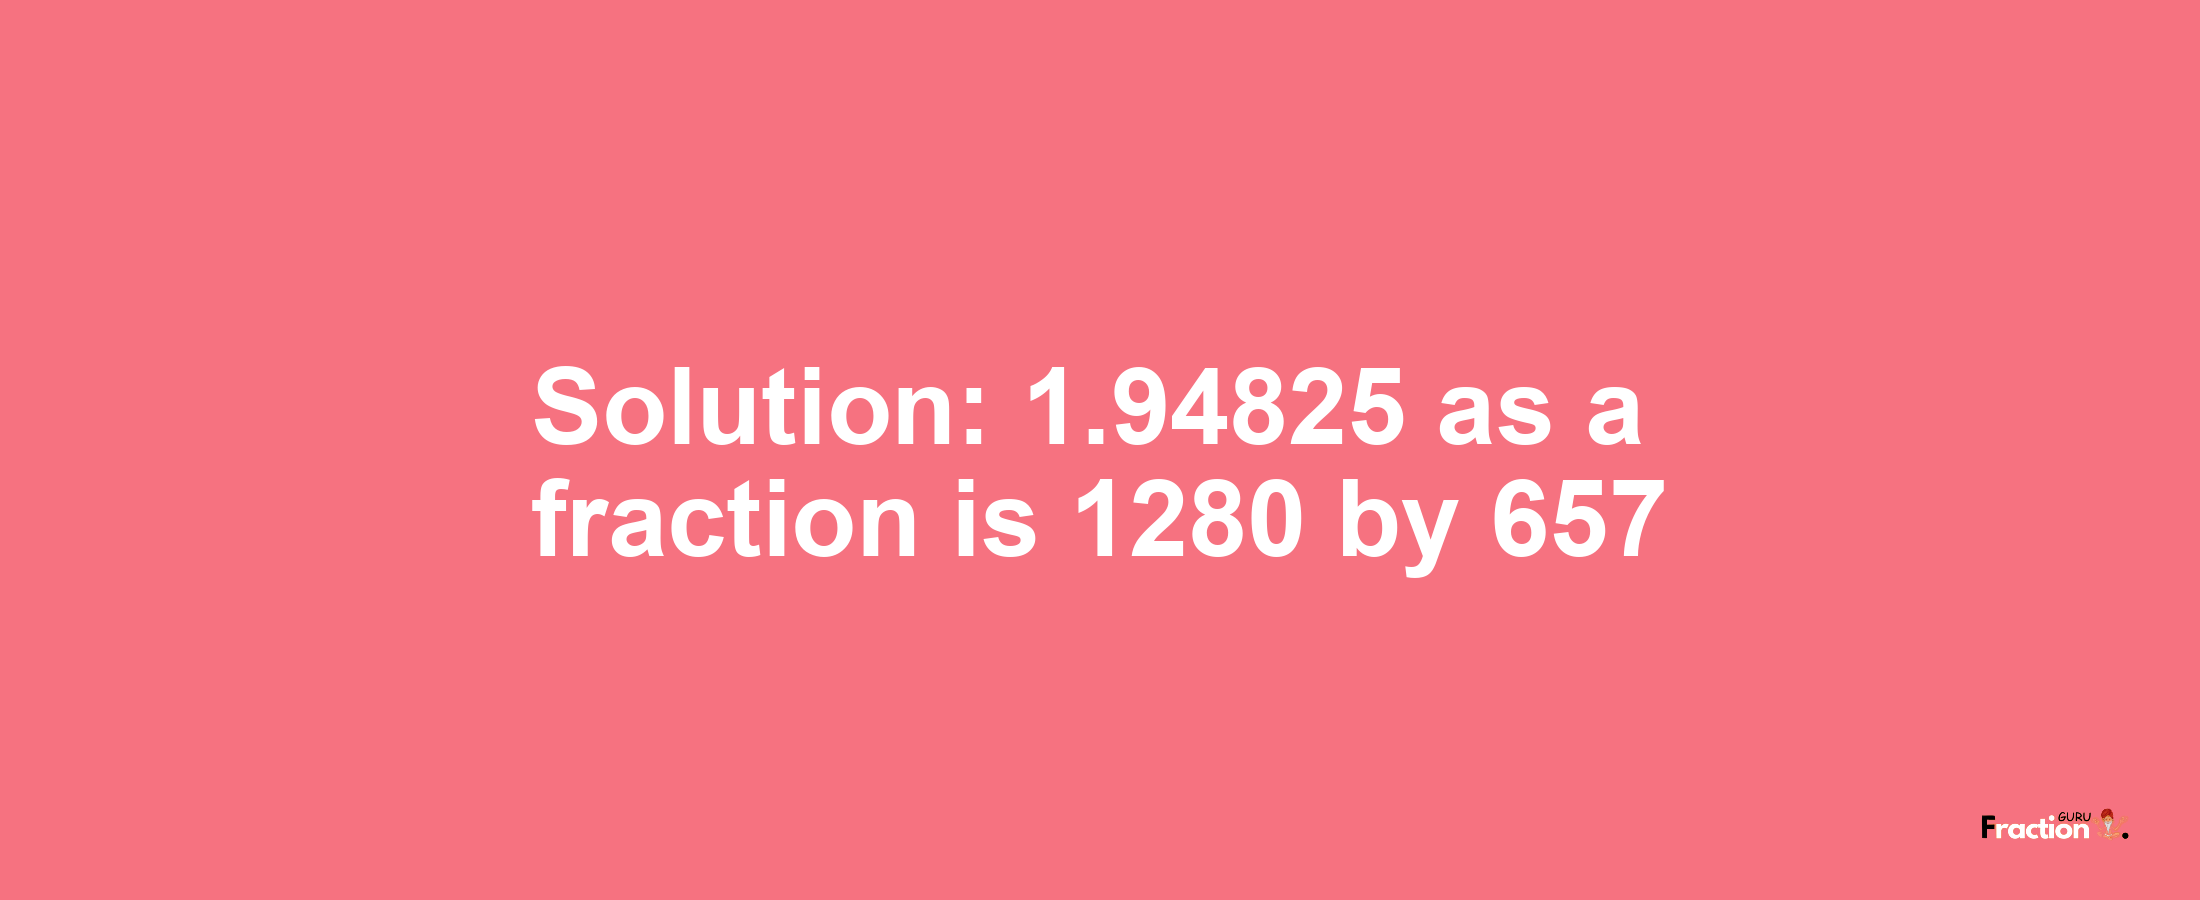 Solution:1.94825 as a fraction is 1280/657